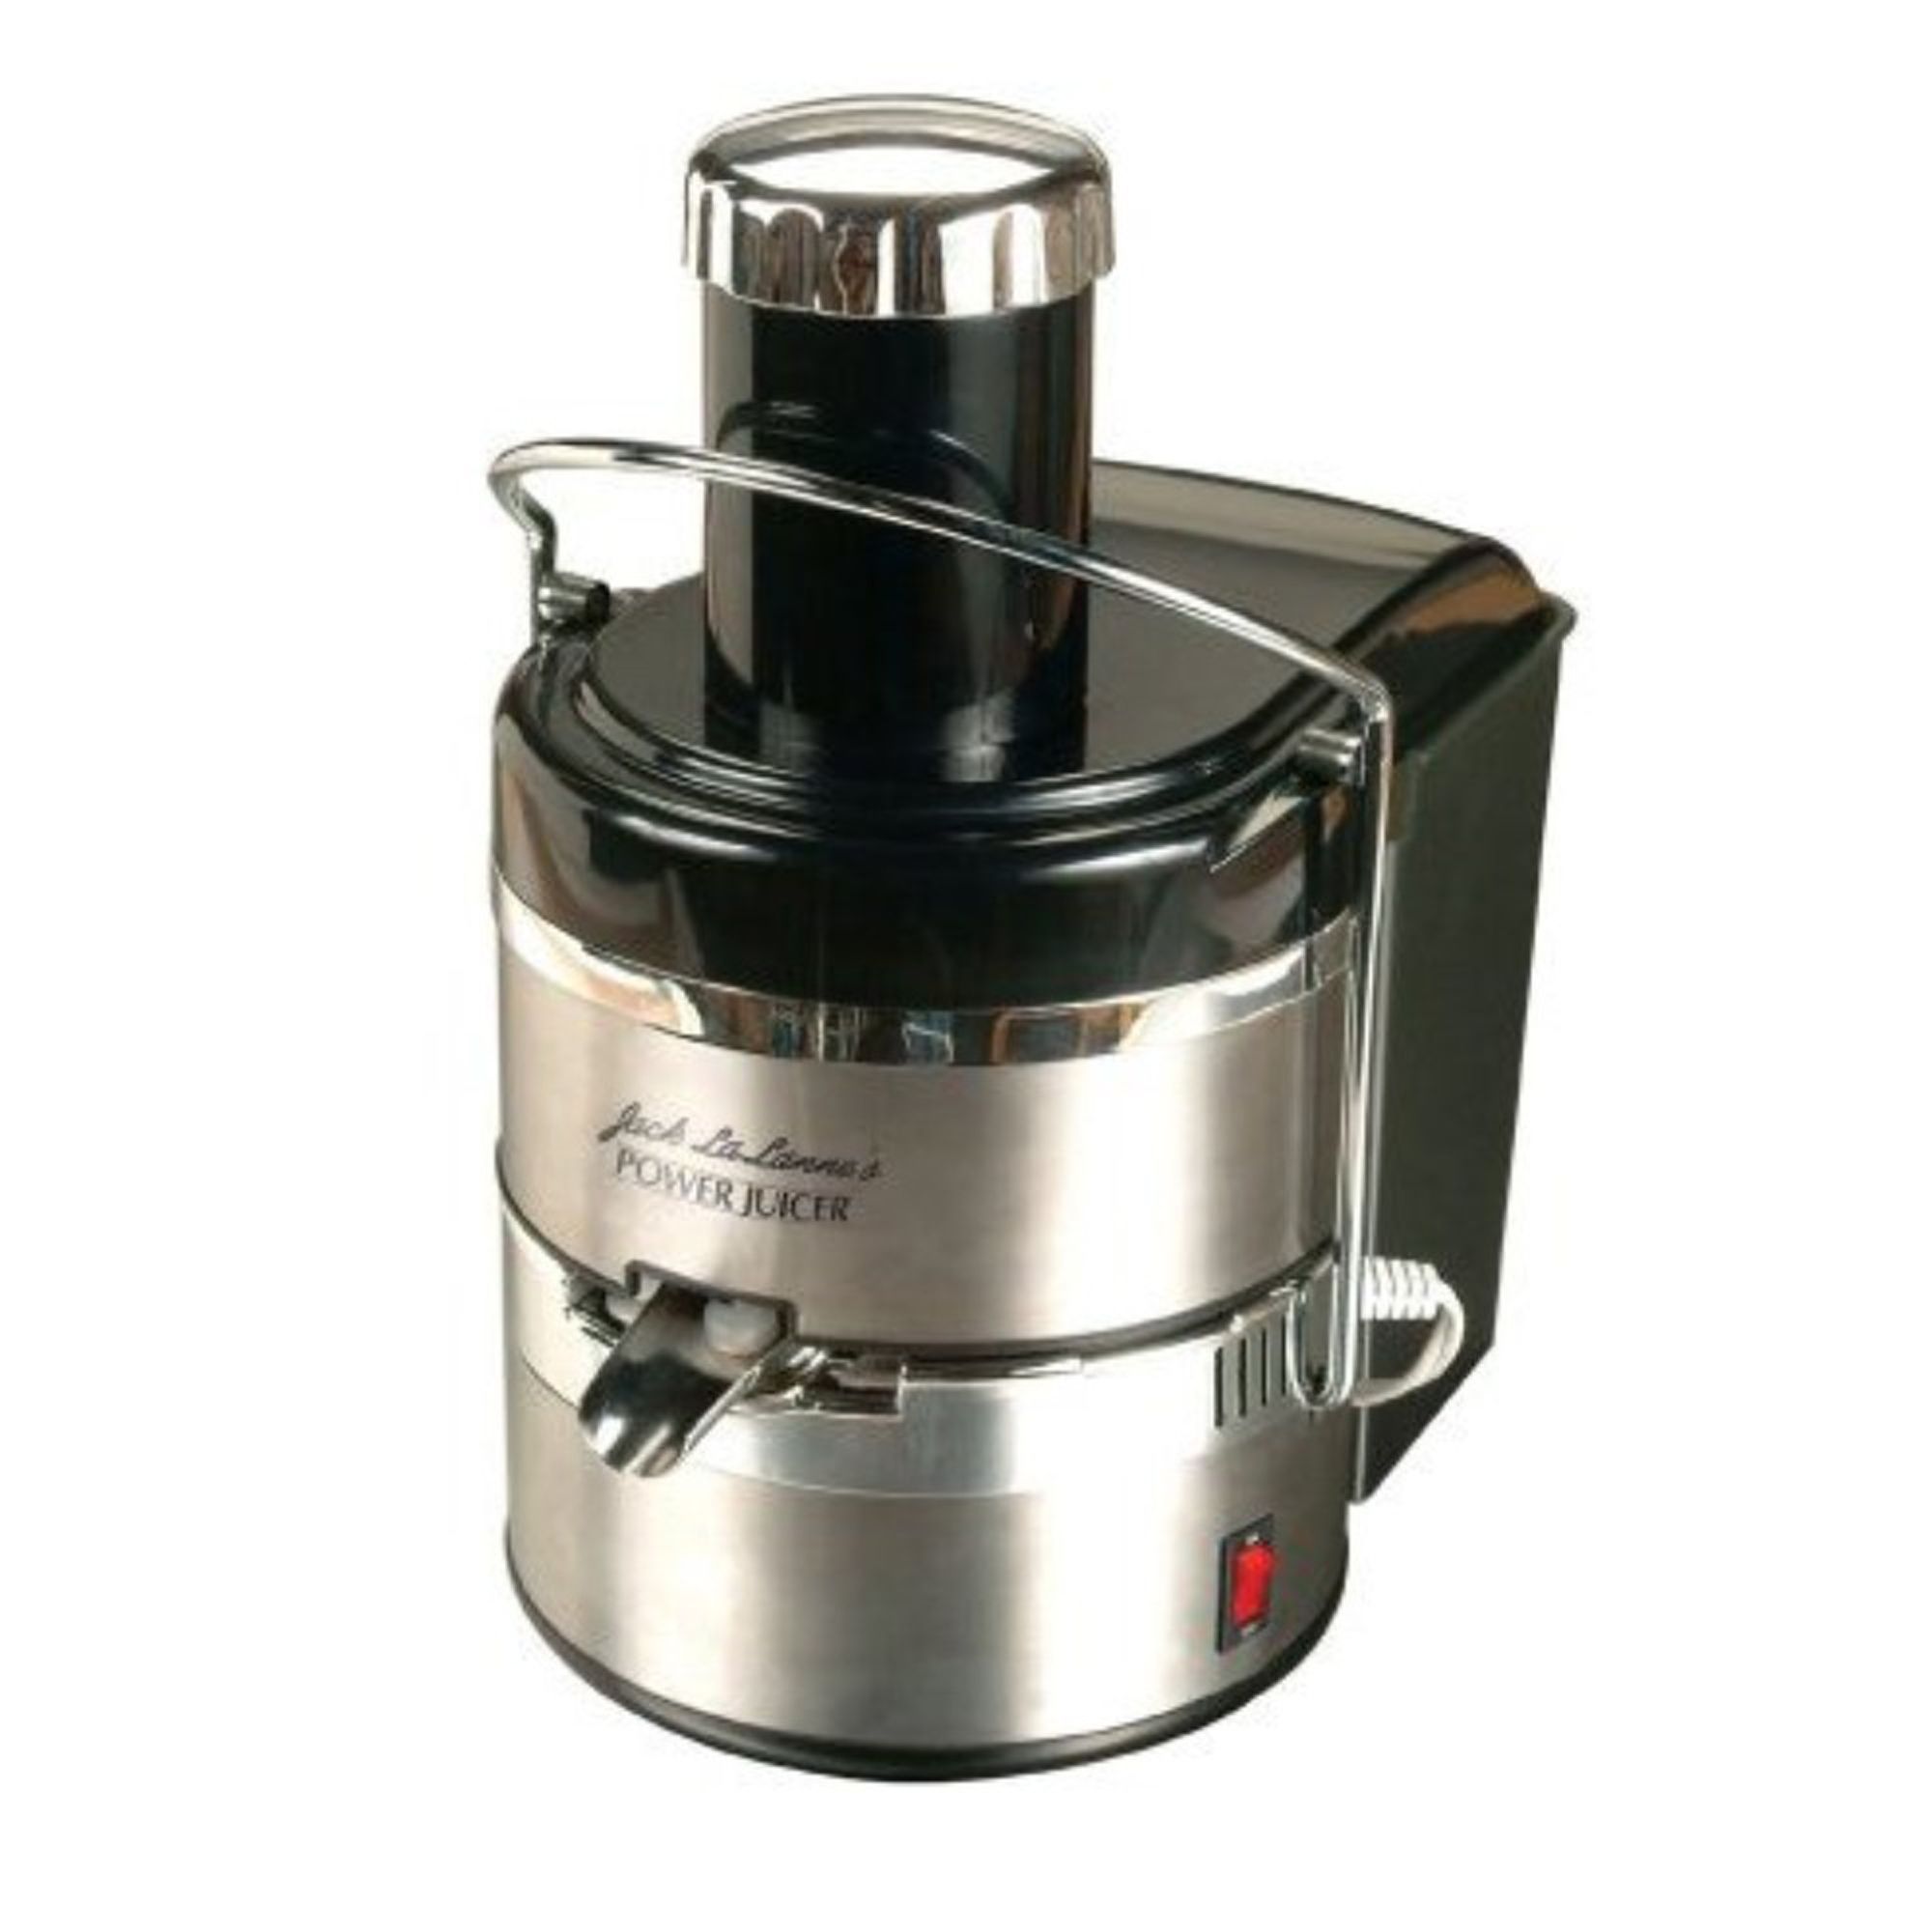 Power Juicer Deluxe Electric Juicer - Stainless Steel